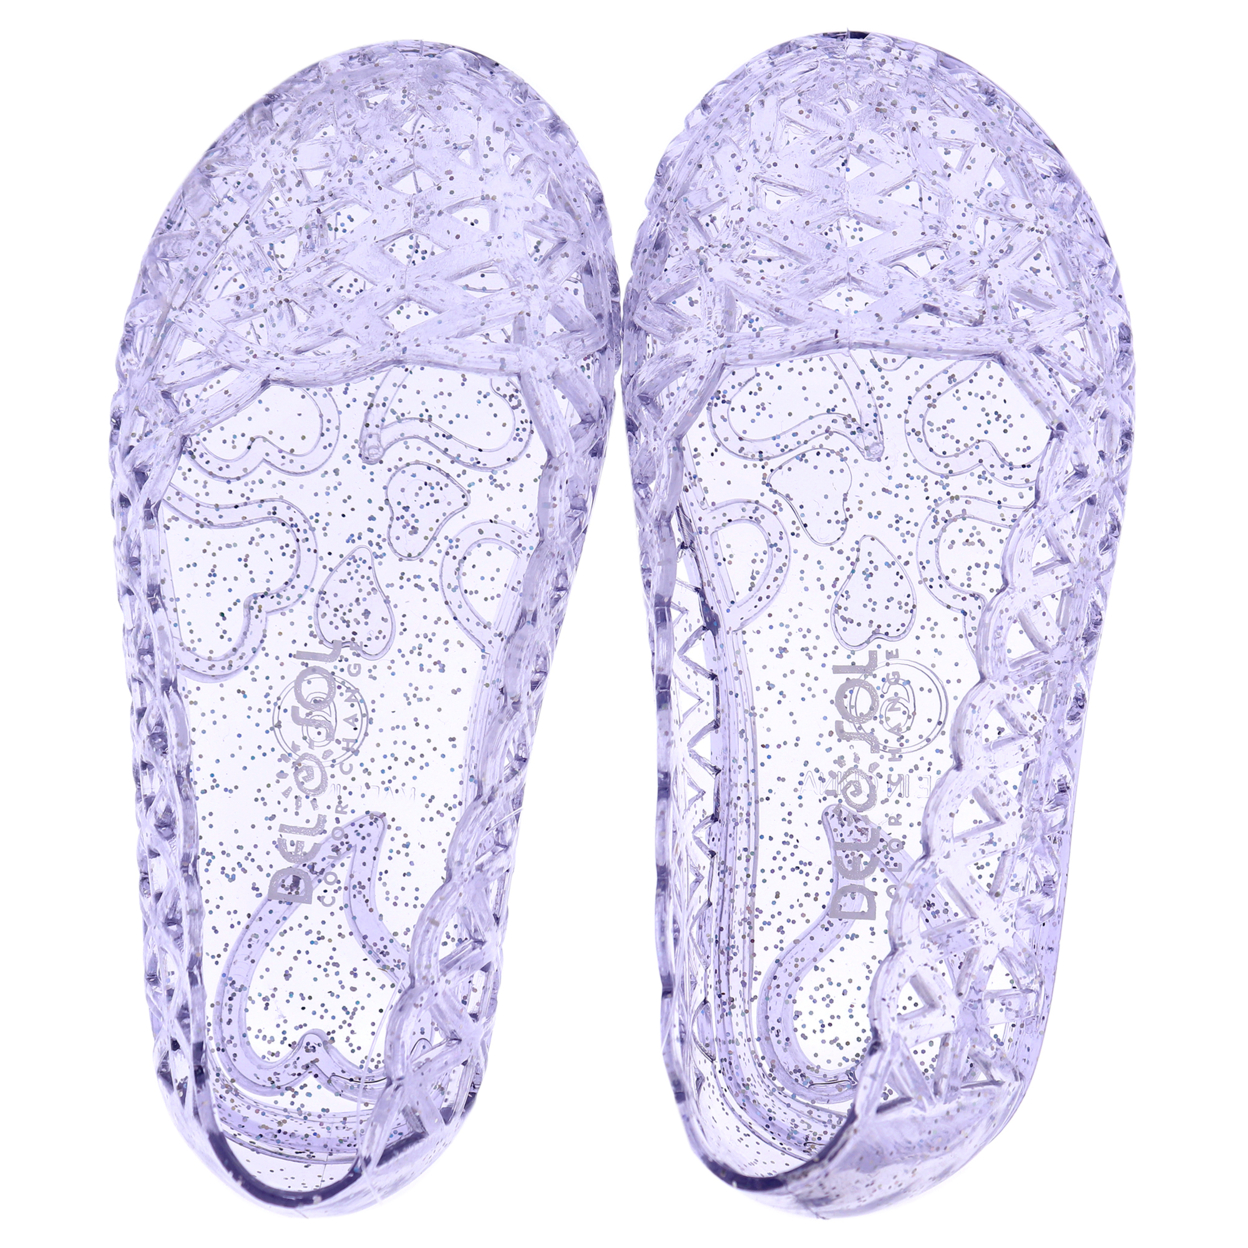 Heart Sole Girl Jellies Shoes - 6 Purple by DelSol for Kids - 1 Pair Shoes - image 1 of 6